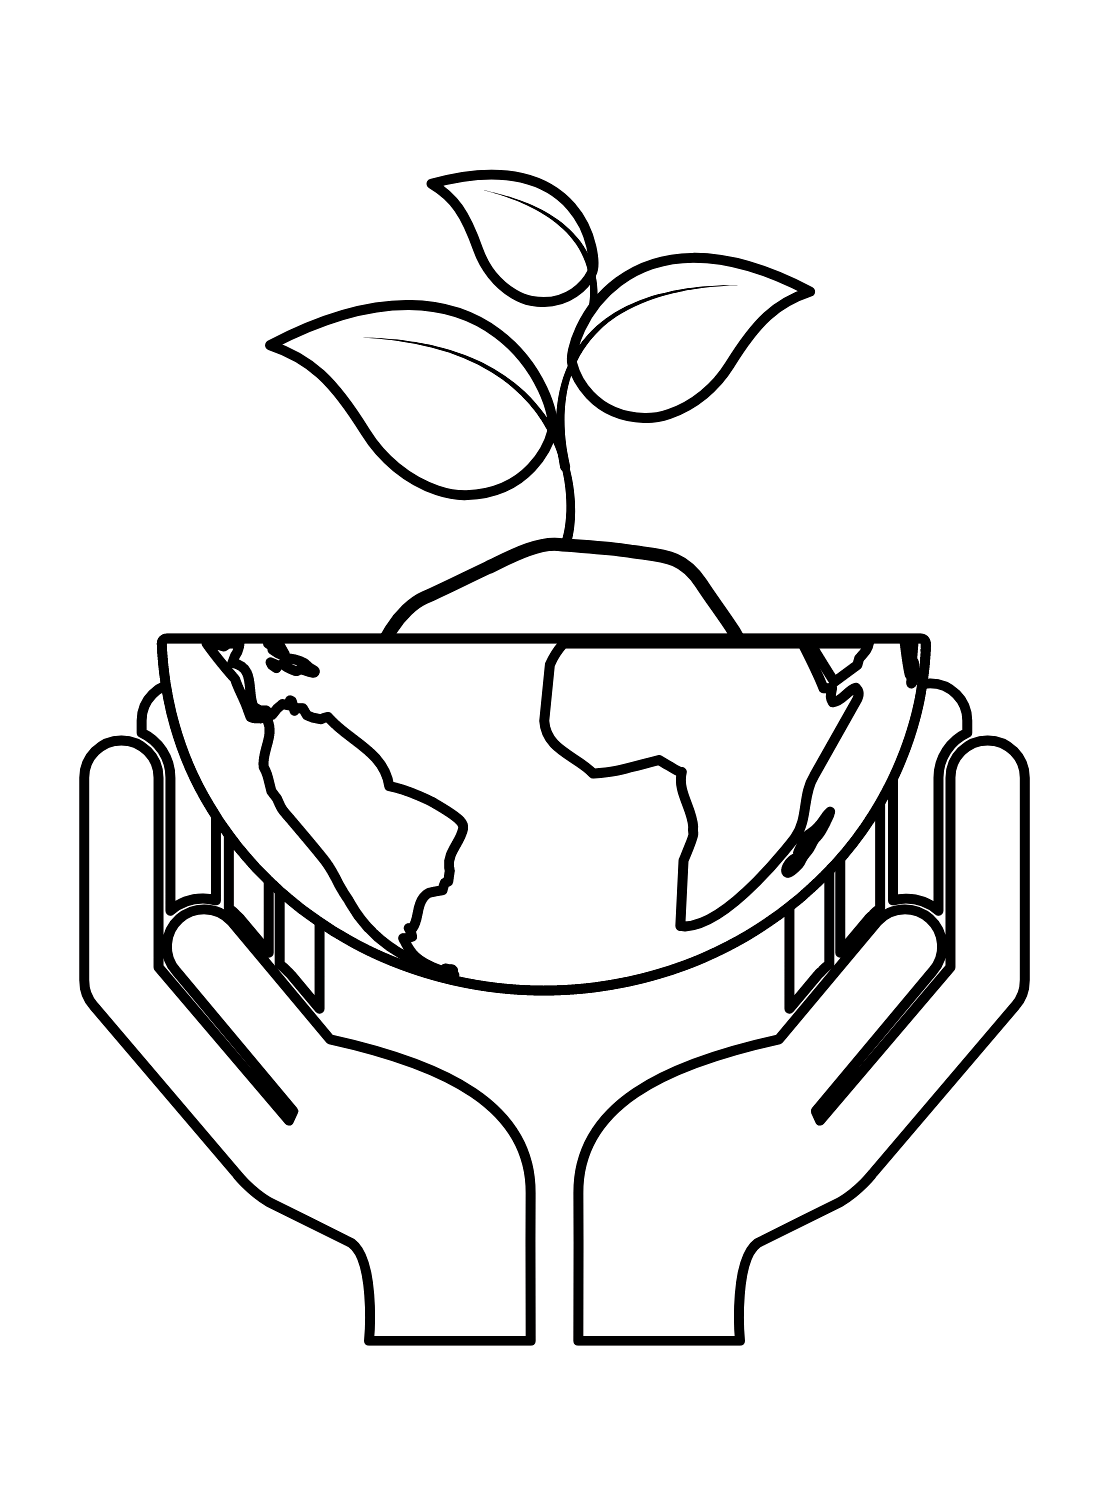 Eco Friendly Environment Coloring Page